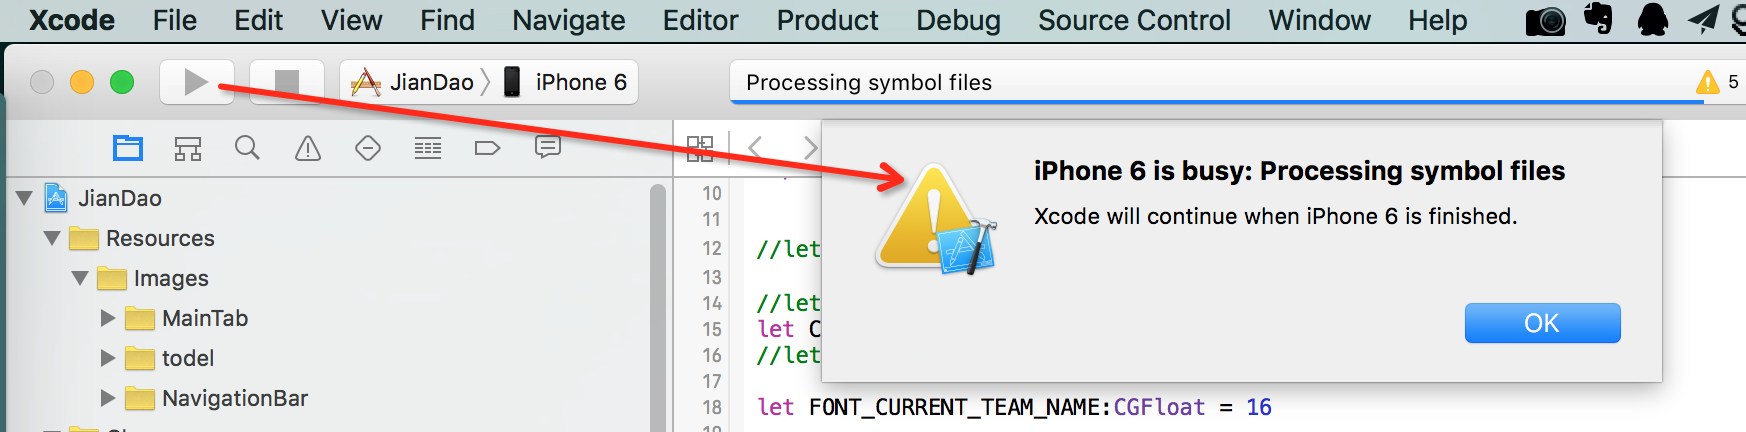 iphone 6 is busy processing symbol file